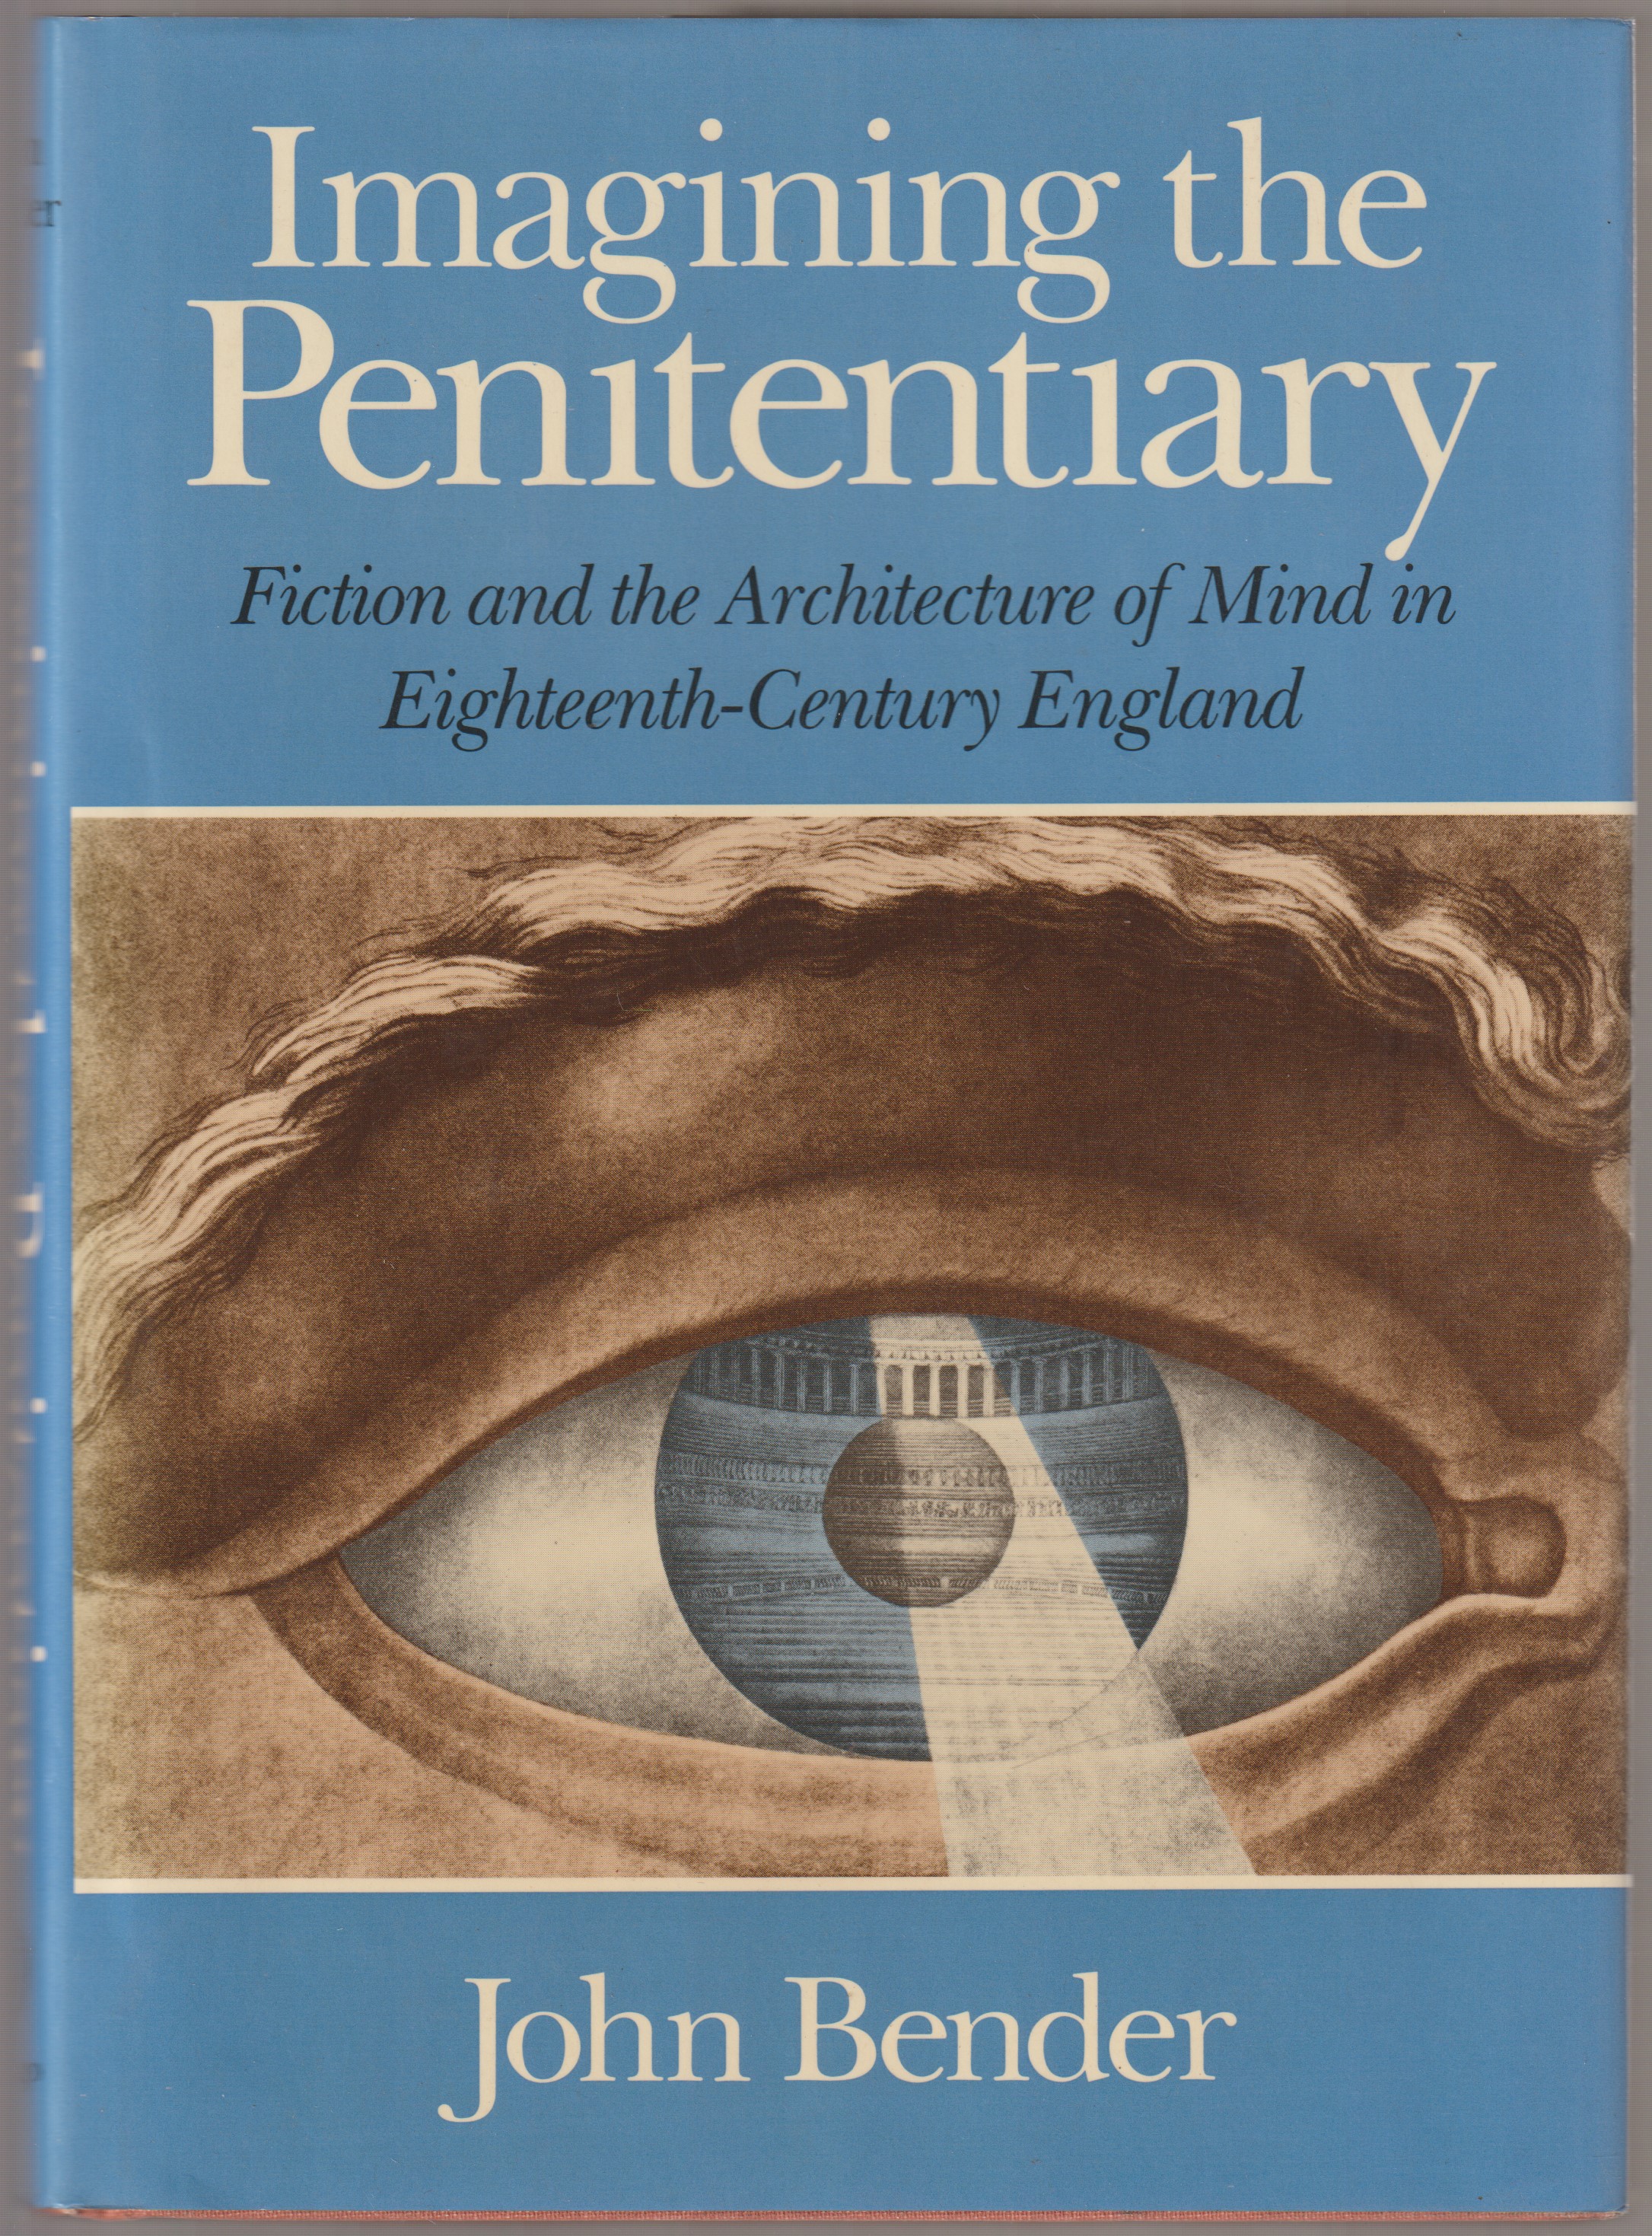 Imagining the penitentiary : fiction and the architecture of mind in eighteenth-century England.